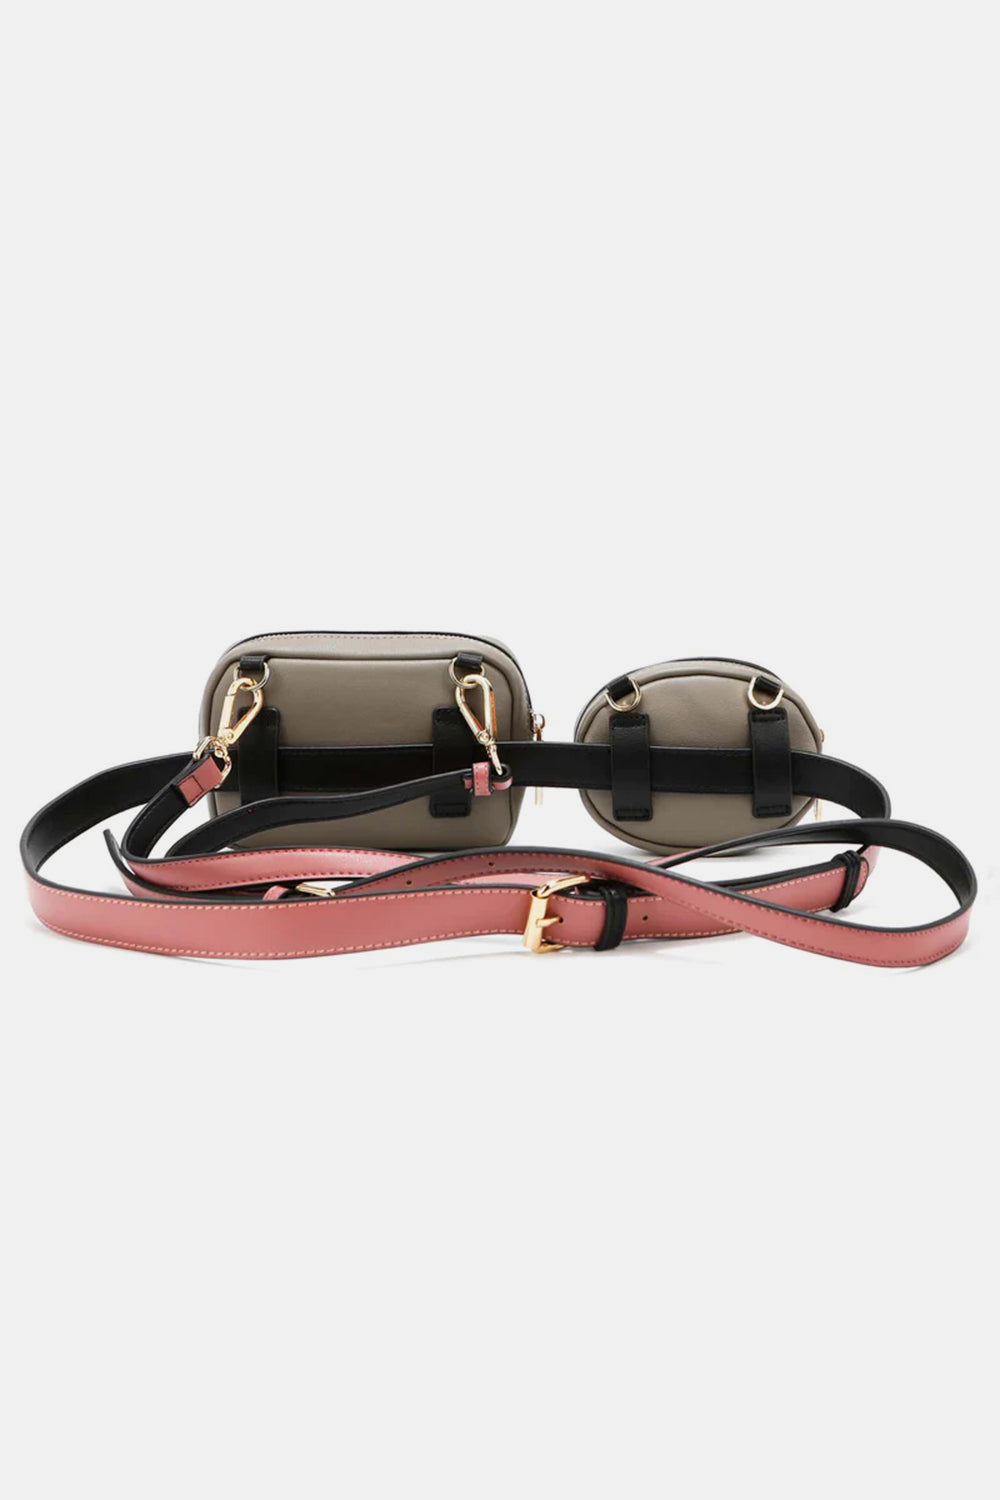 Nicole Lee USA Double Pouch Fanny Pack - AllIn Computer